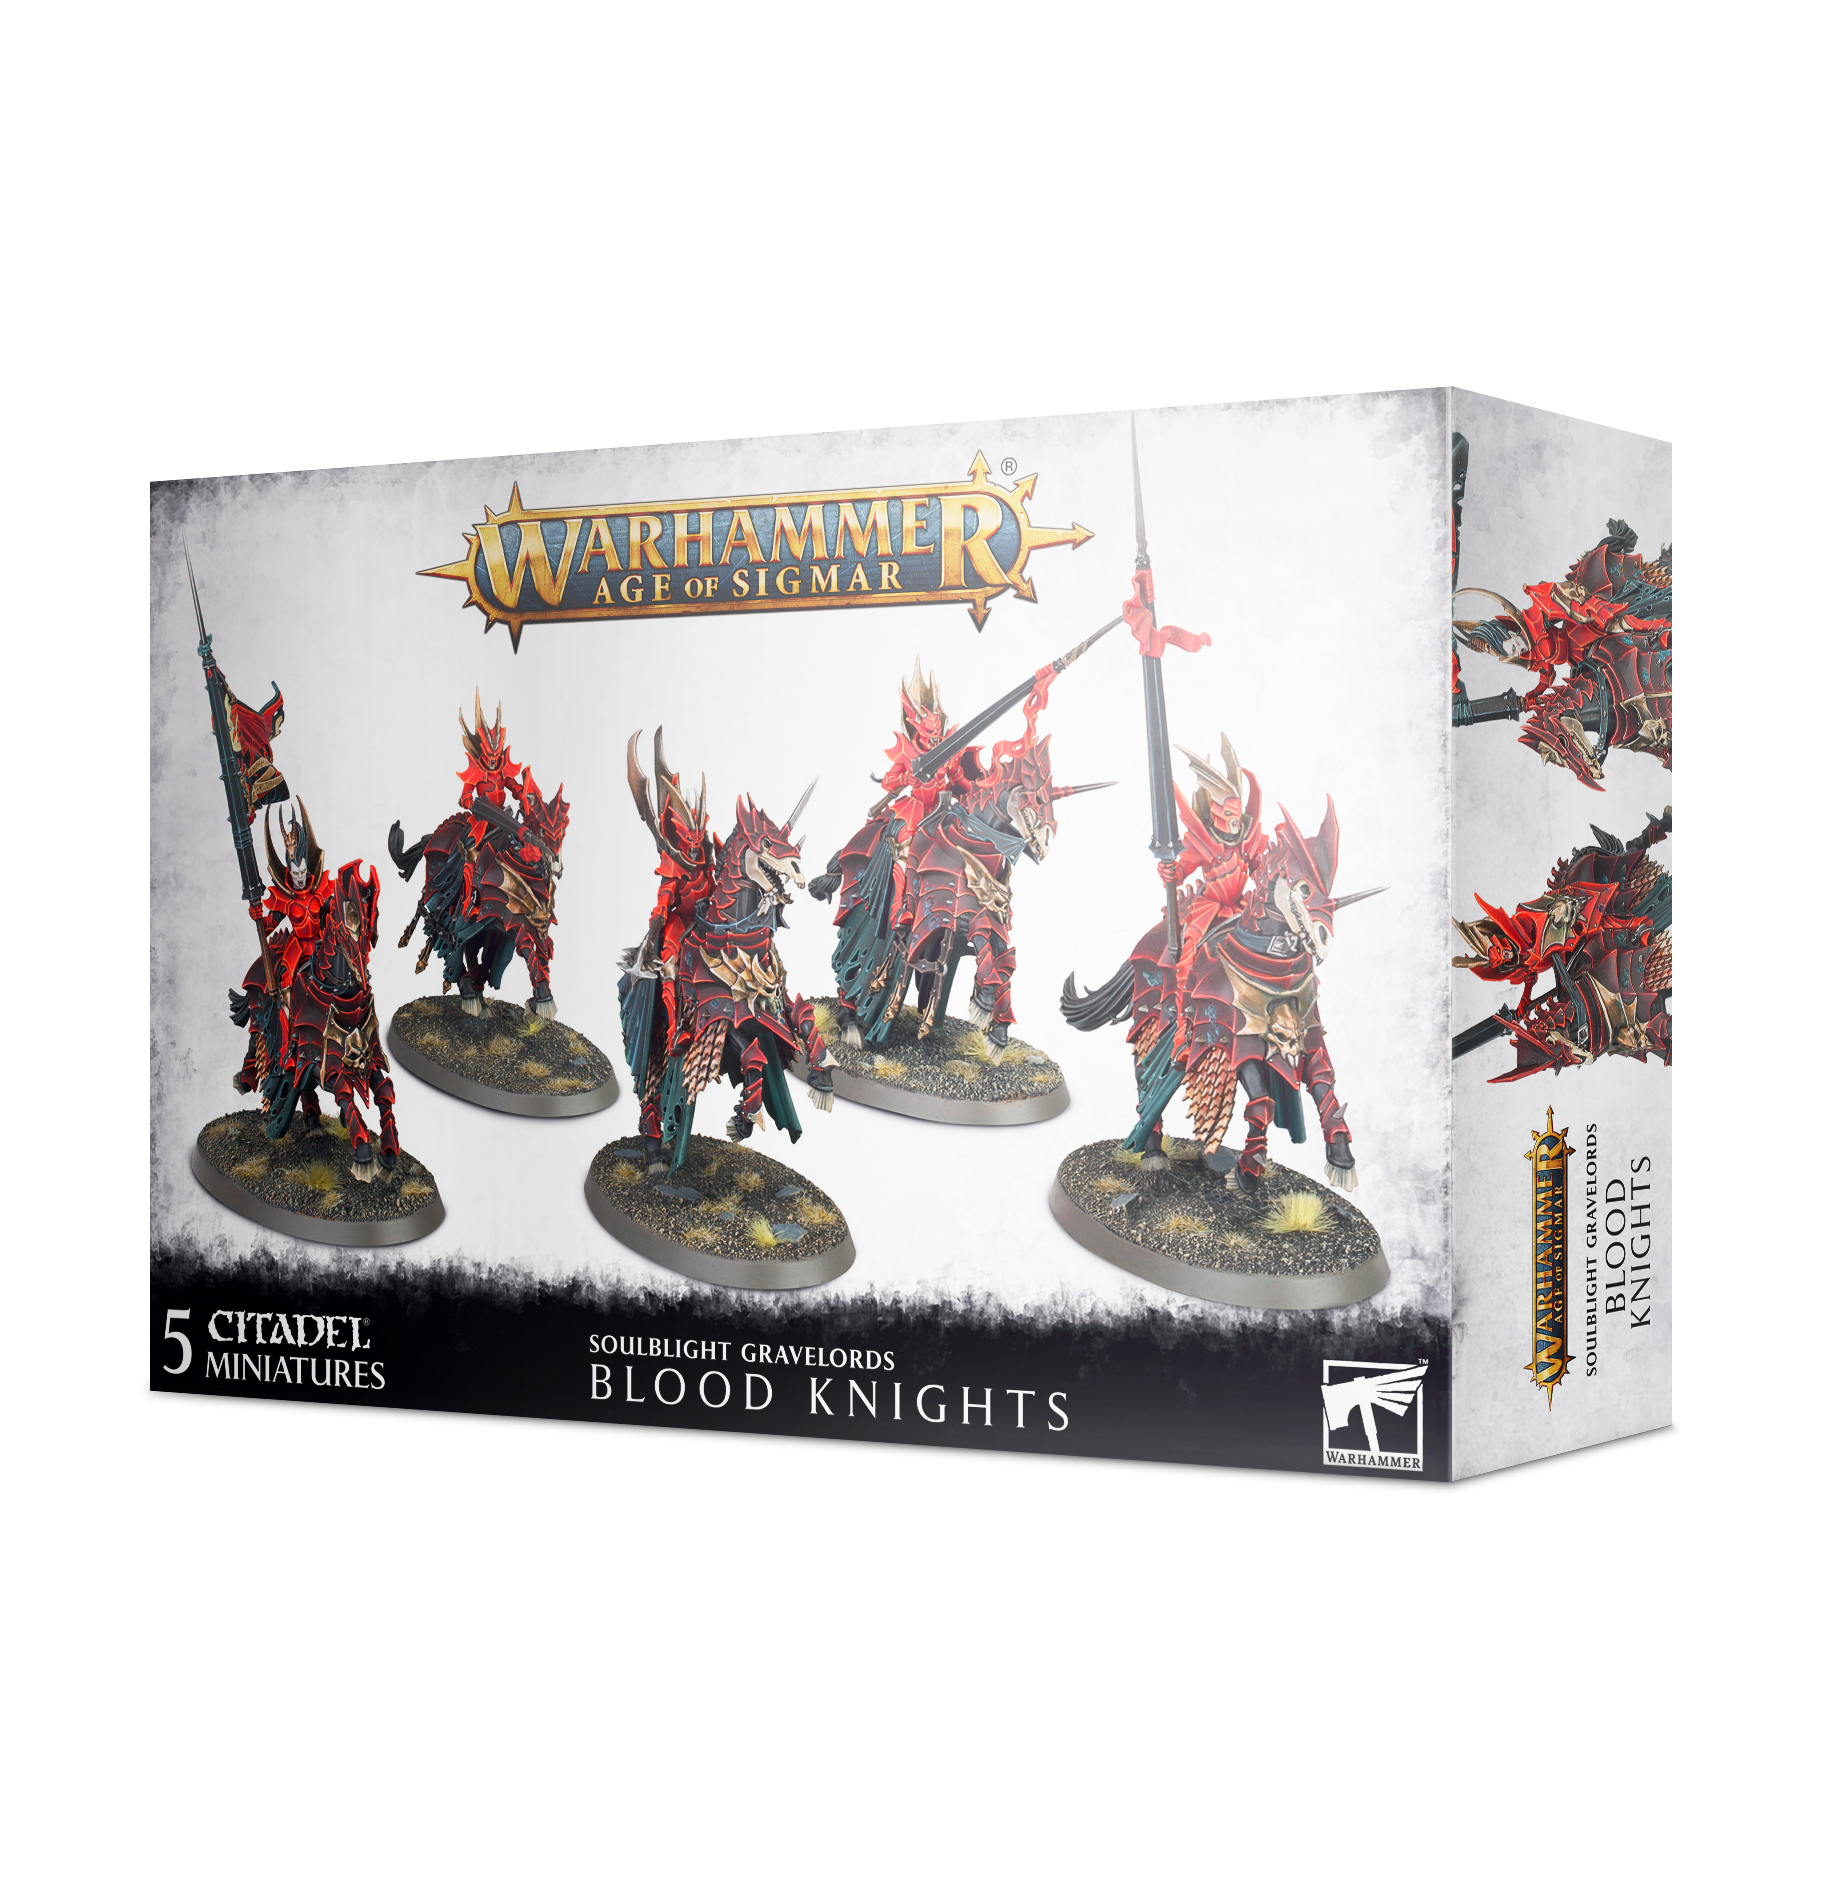 Blood Knights - 91-41 - Soulblight Gravelords - Warhammer Age of Sigmar